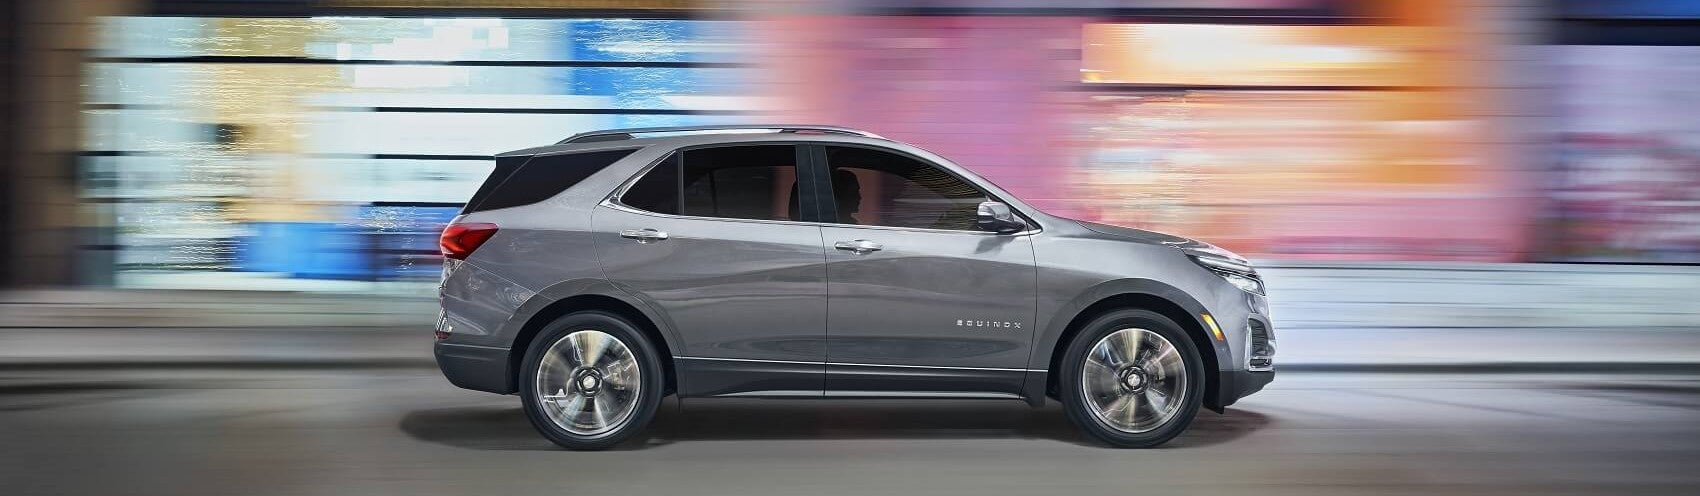 silver chevy equinox driving down street in front of colorful, blurred background